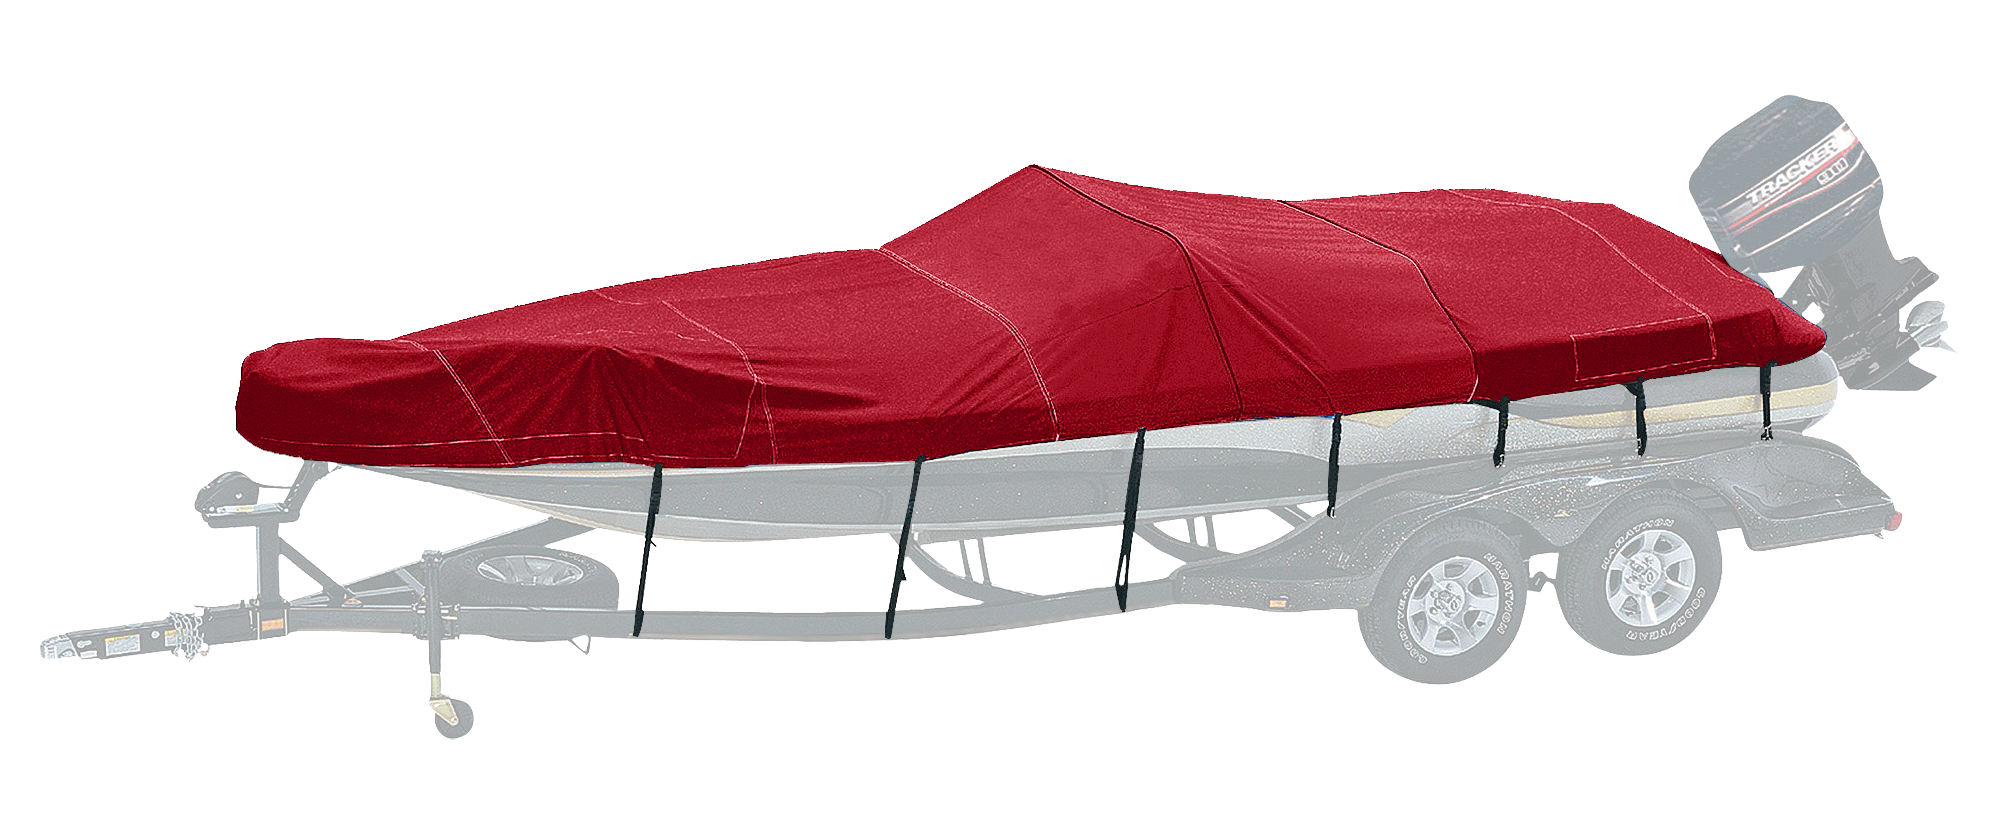 Bass Pro Shops Exact Fit Boat Cover by Westland - Tahoe Boats - 2005 204 Deckboat I/O - Burgundy